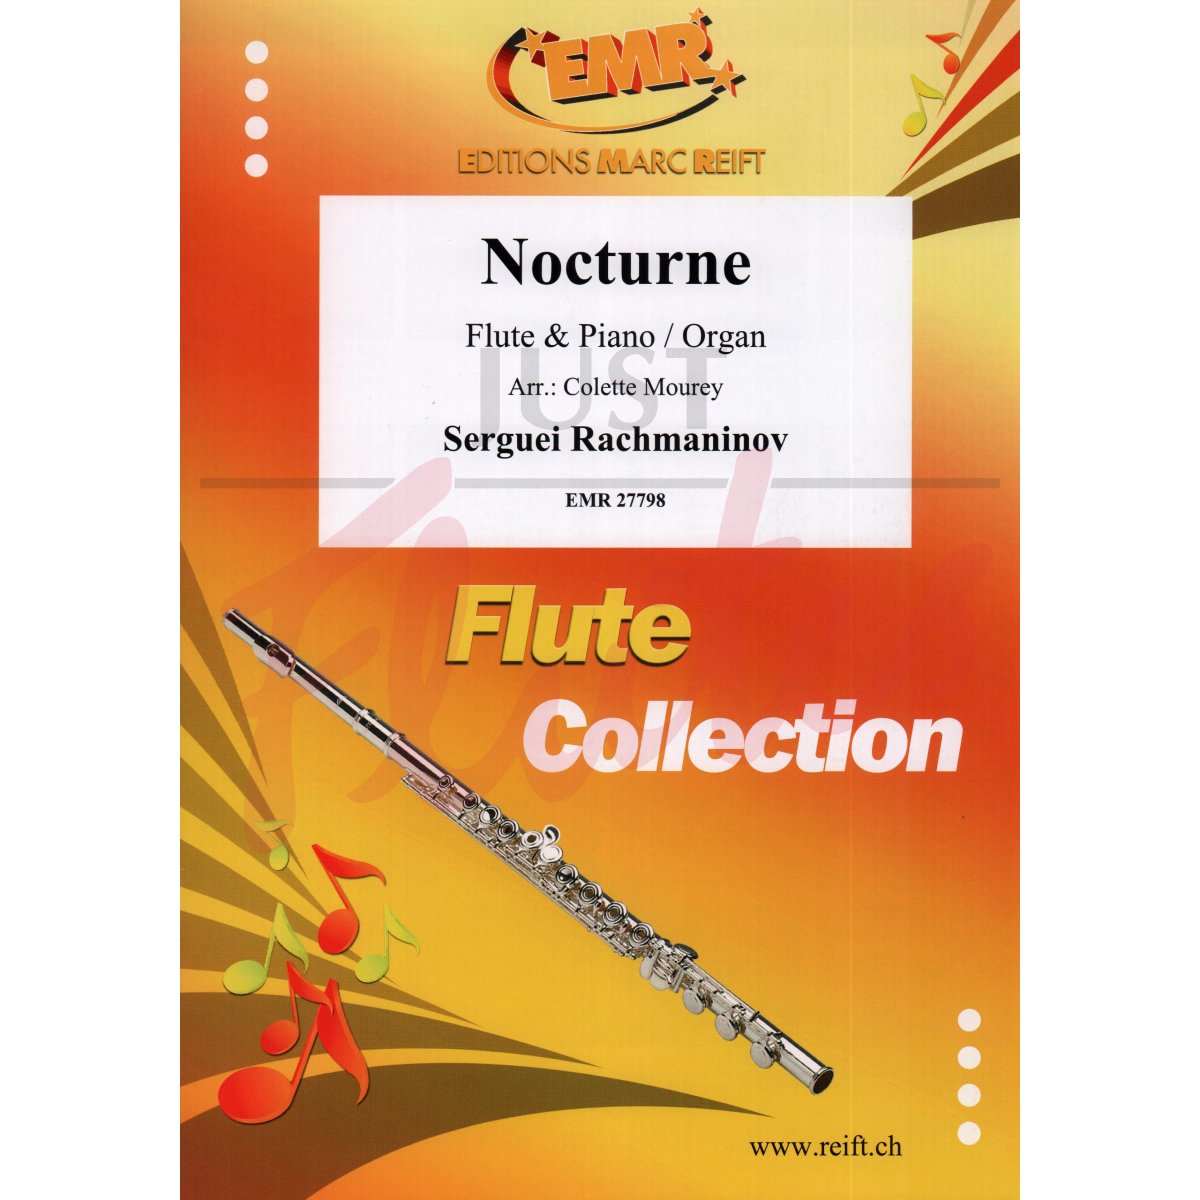 Nocturne for Flute and Piano/Organ